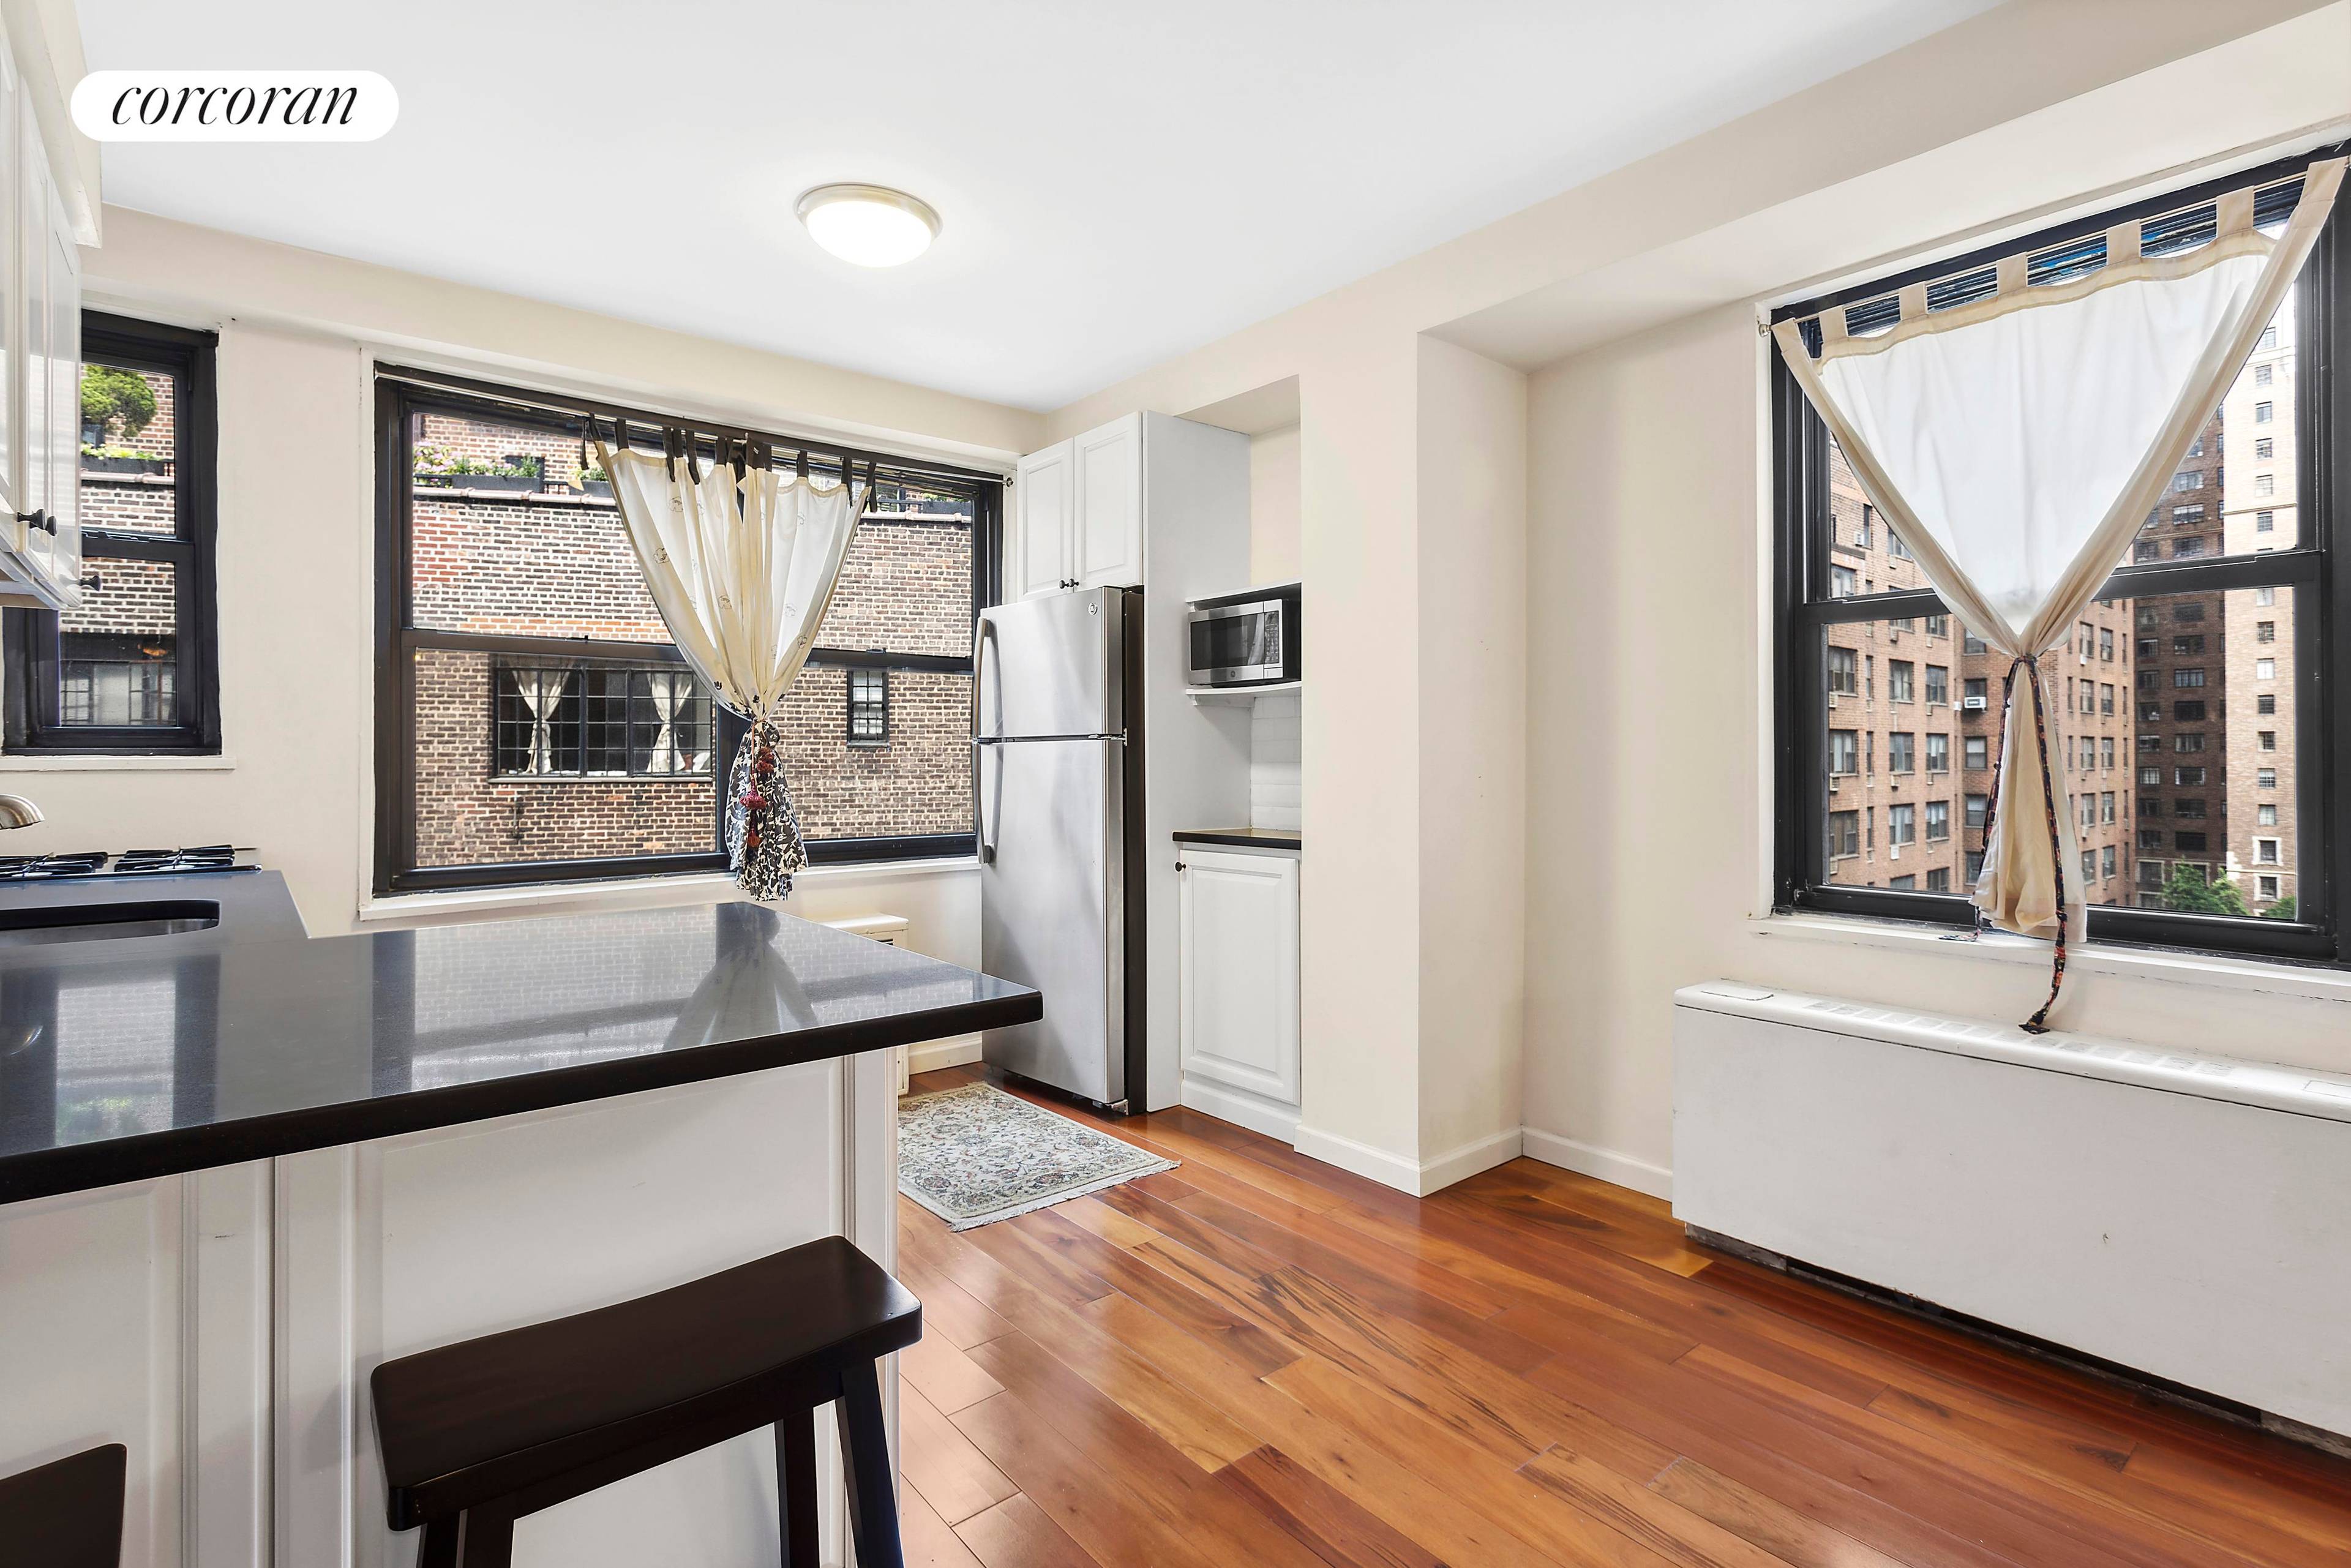 Sunny, spacious, and a superb new price at The Hamilton 305 East 40th Street.